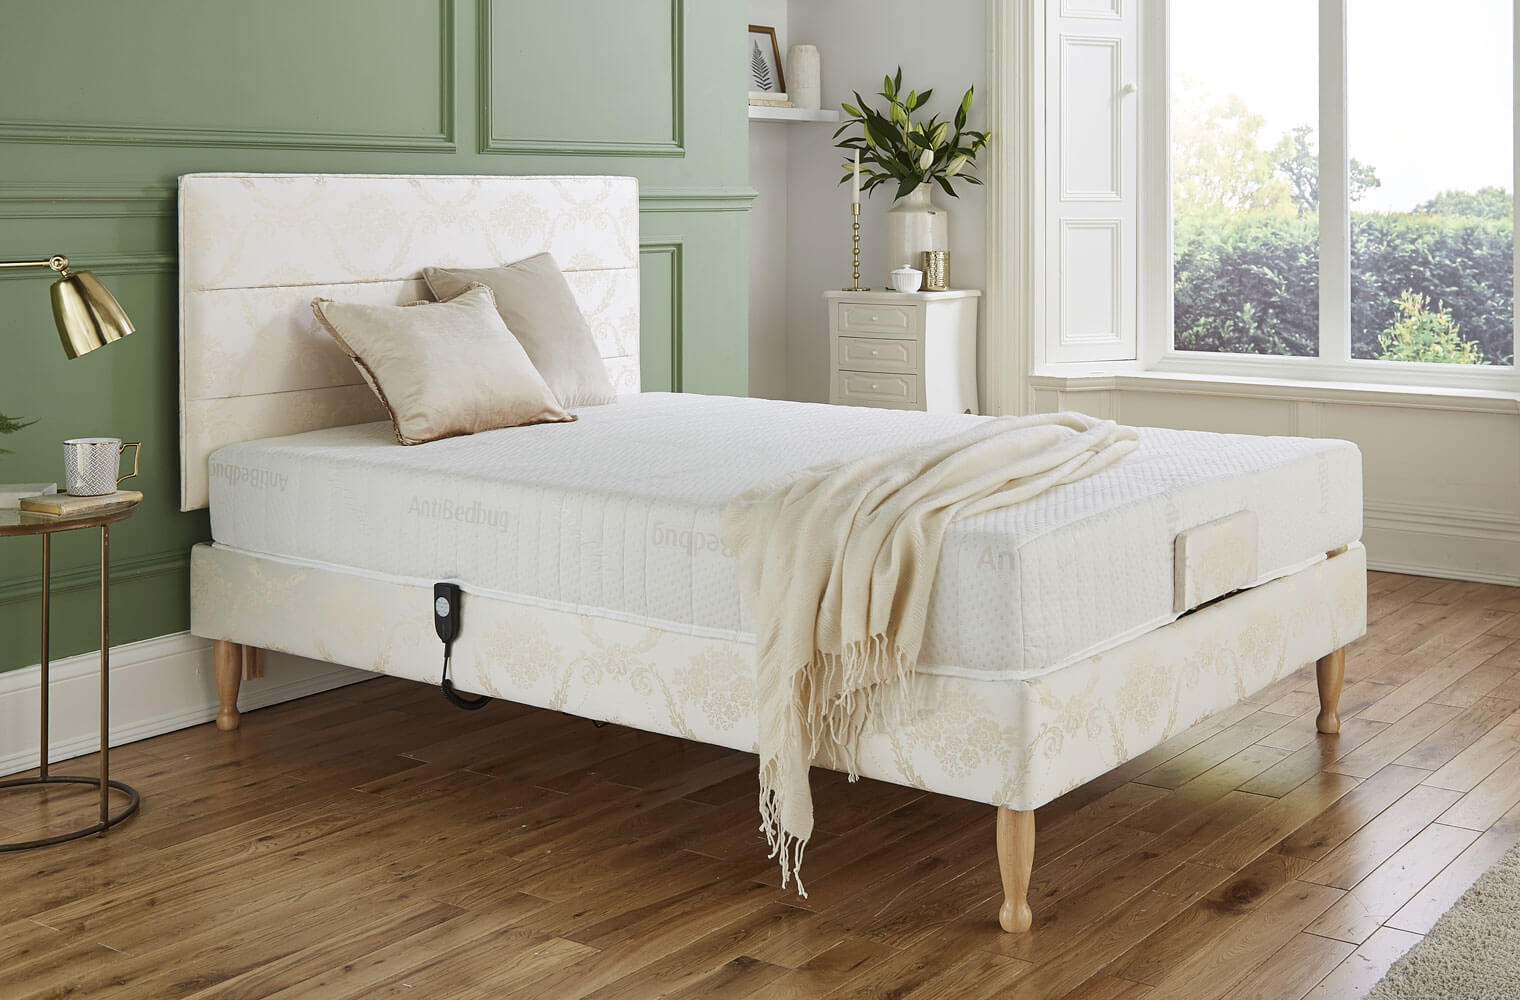 An image of Middletons Warwick Raised Fully Adjustable Automatic Bed with Remote Control Dou...